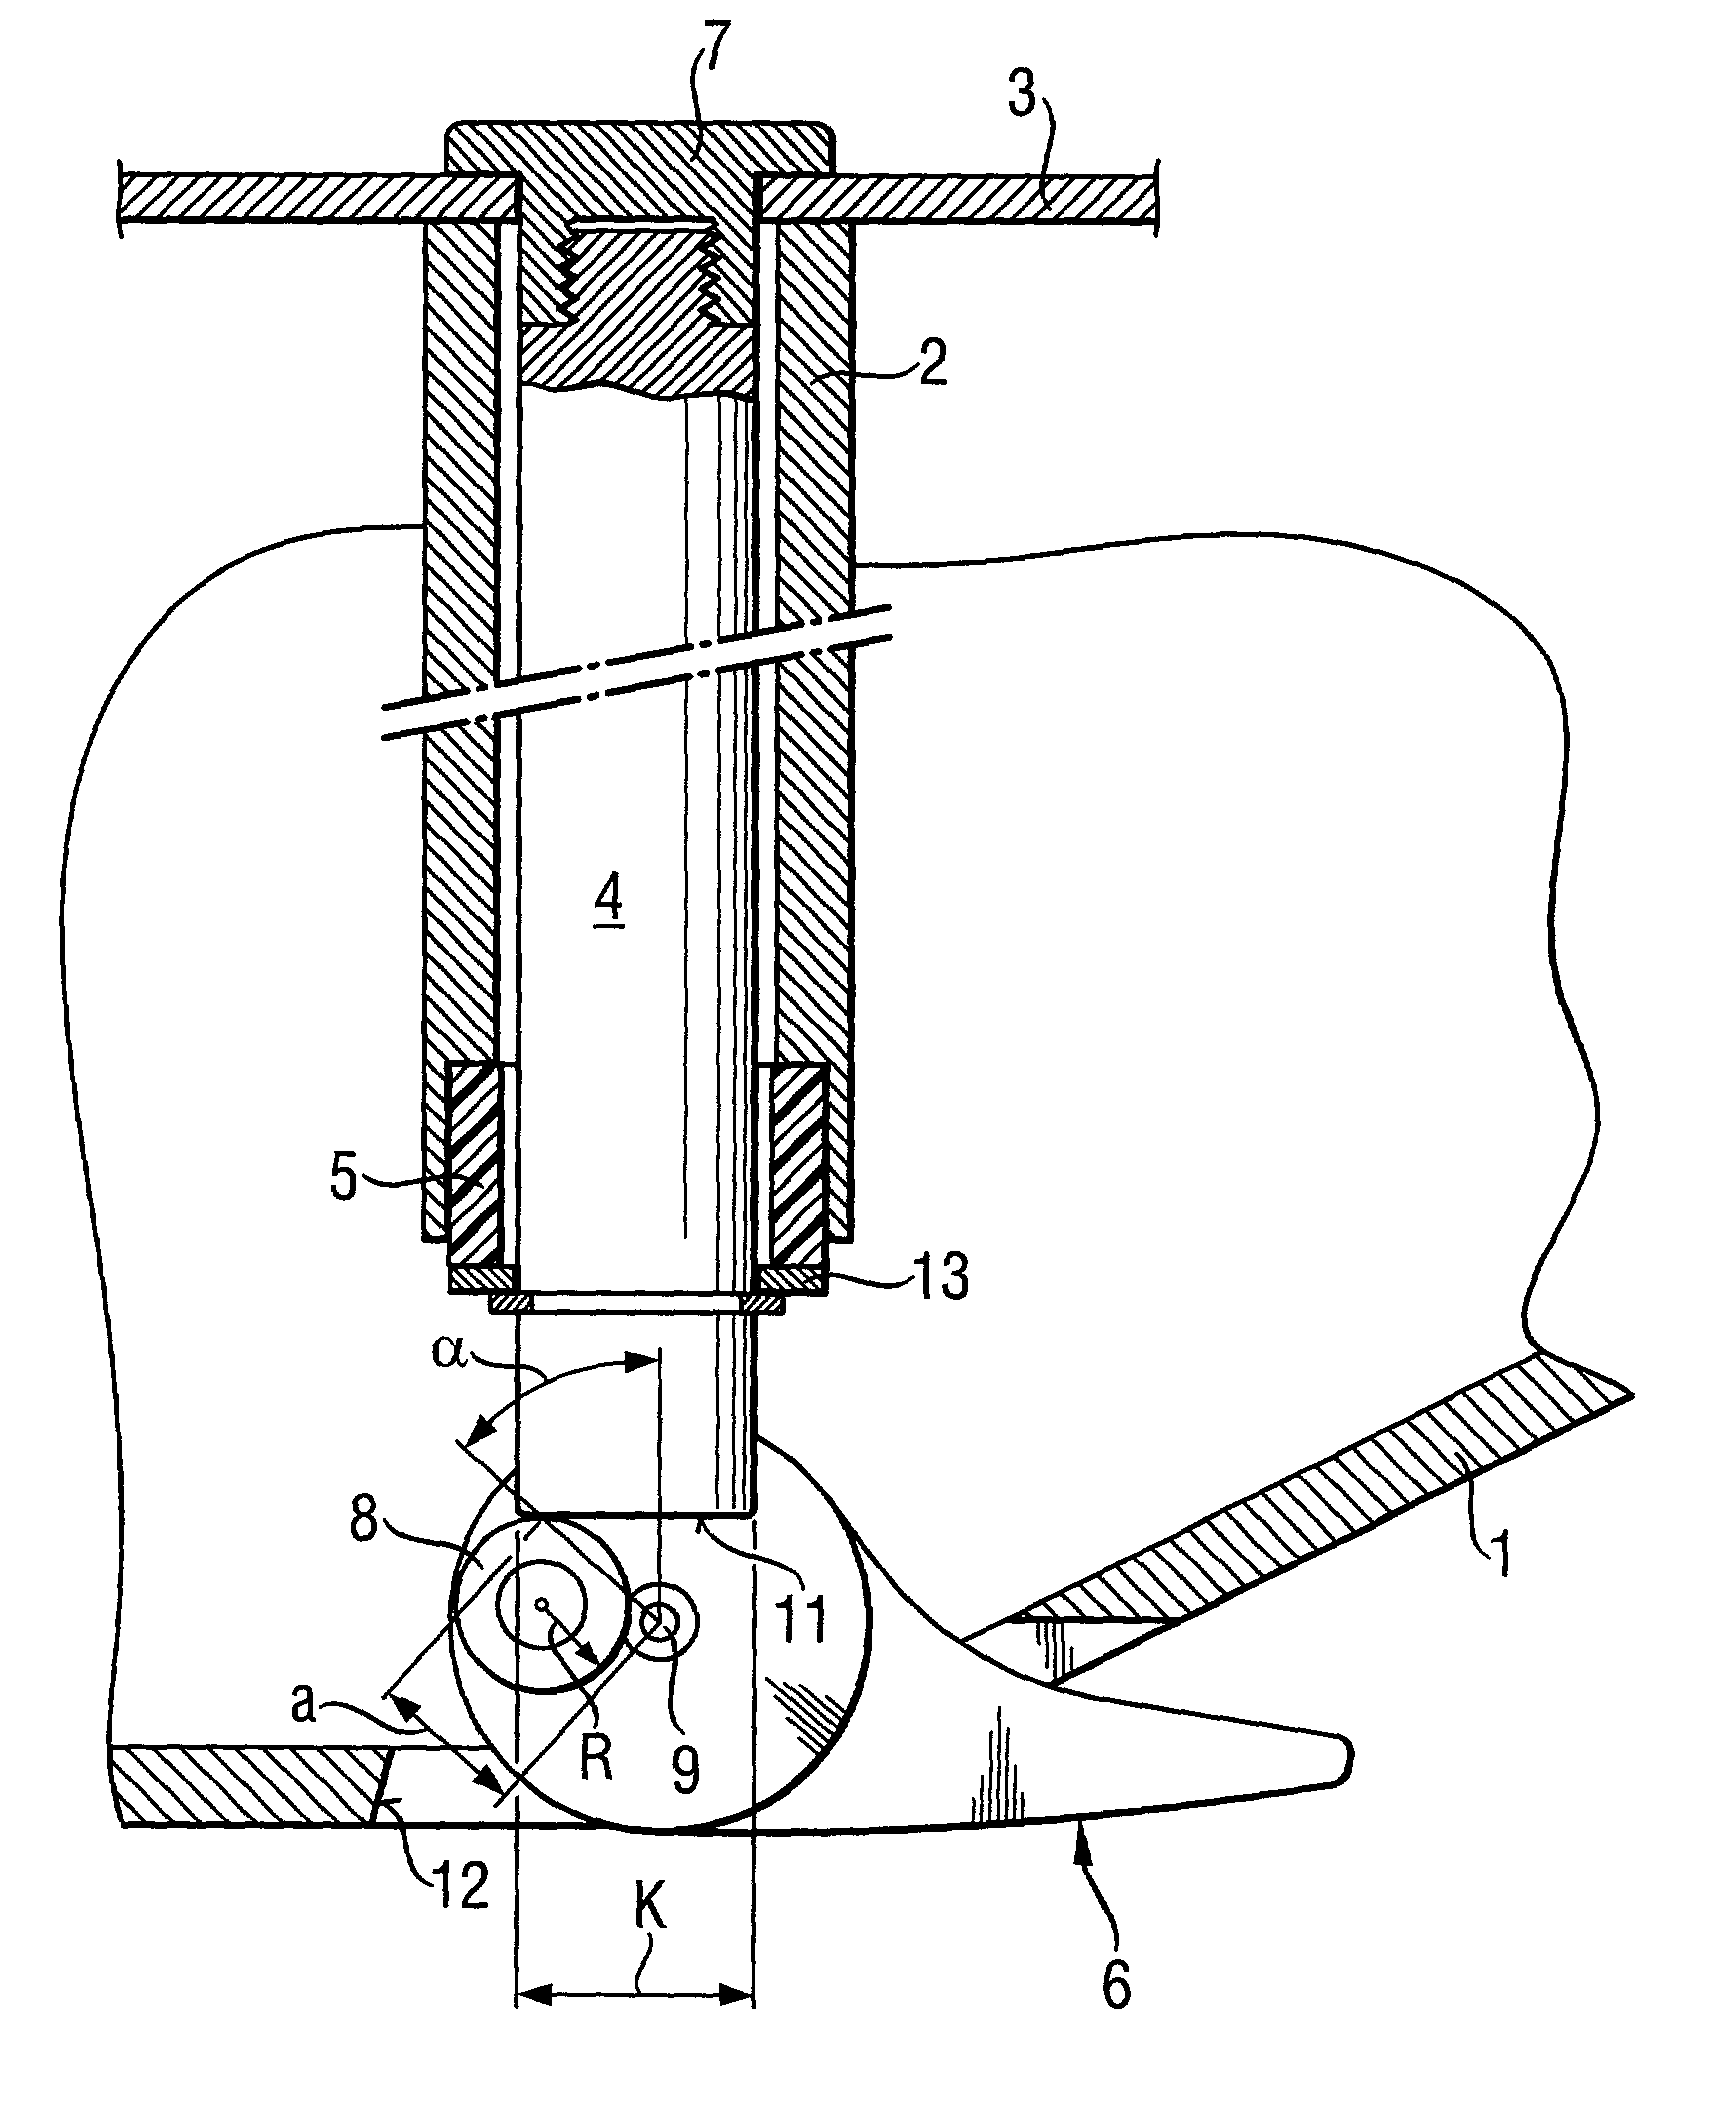 Quick-action locking device for an electric power tool